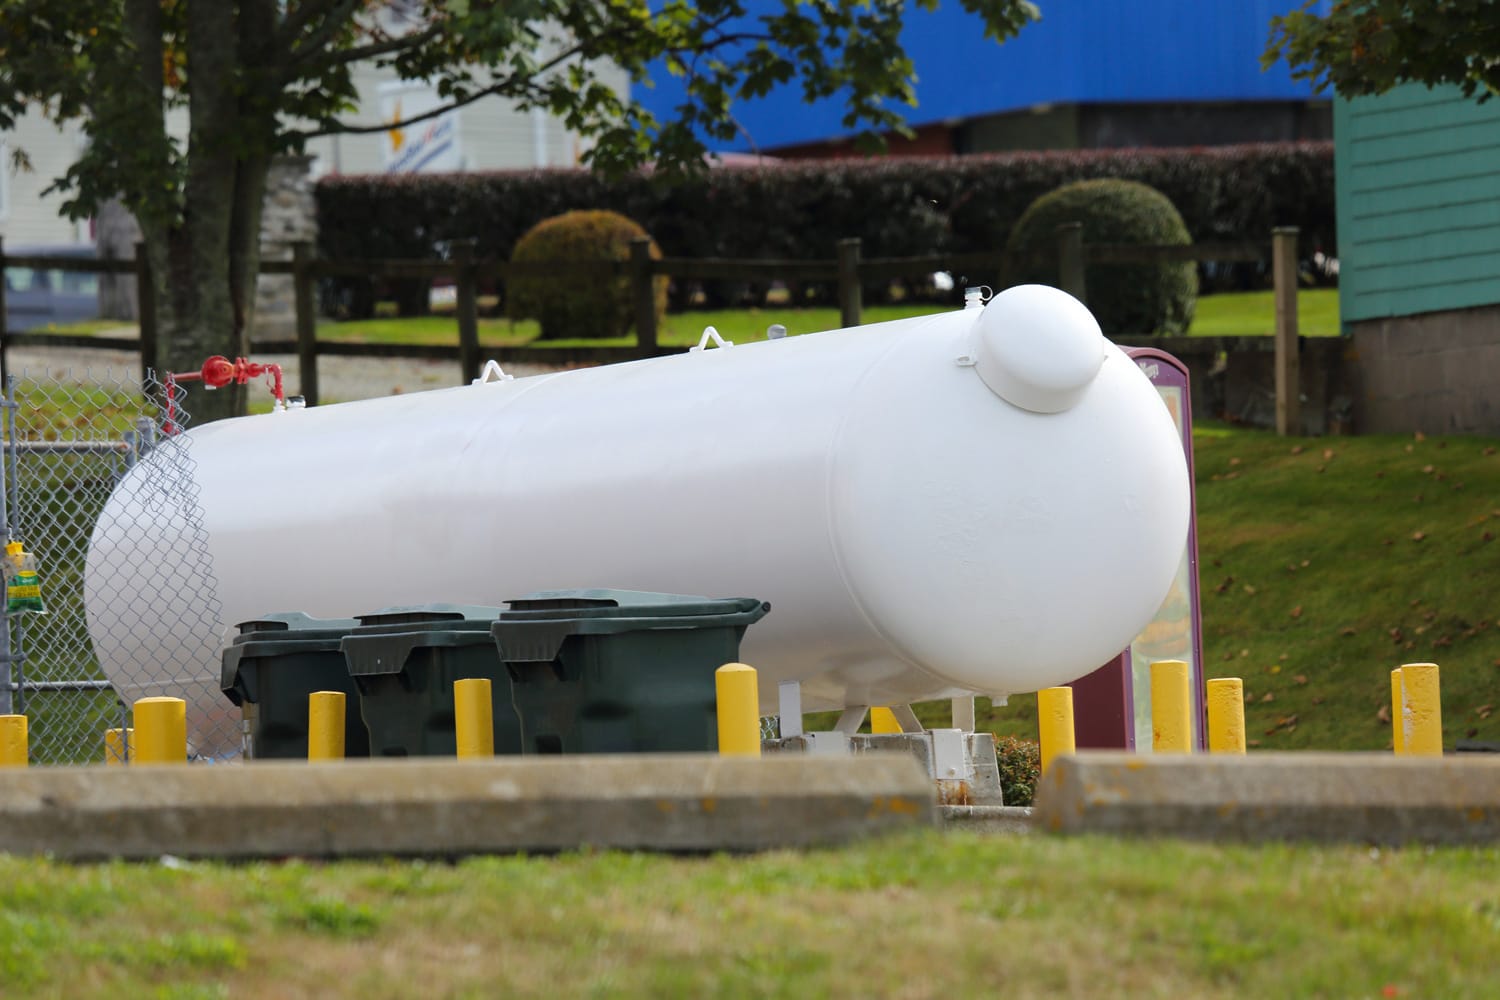 Propane tank with protective barriers around it.